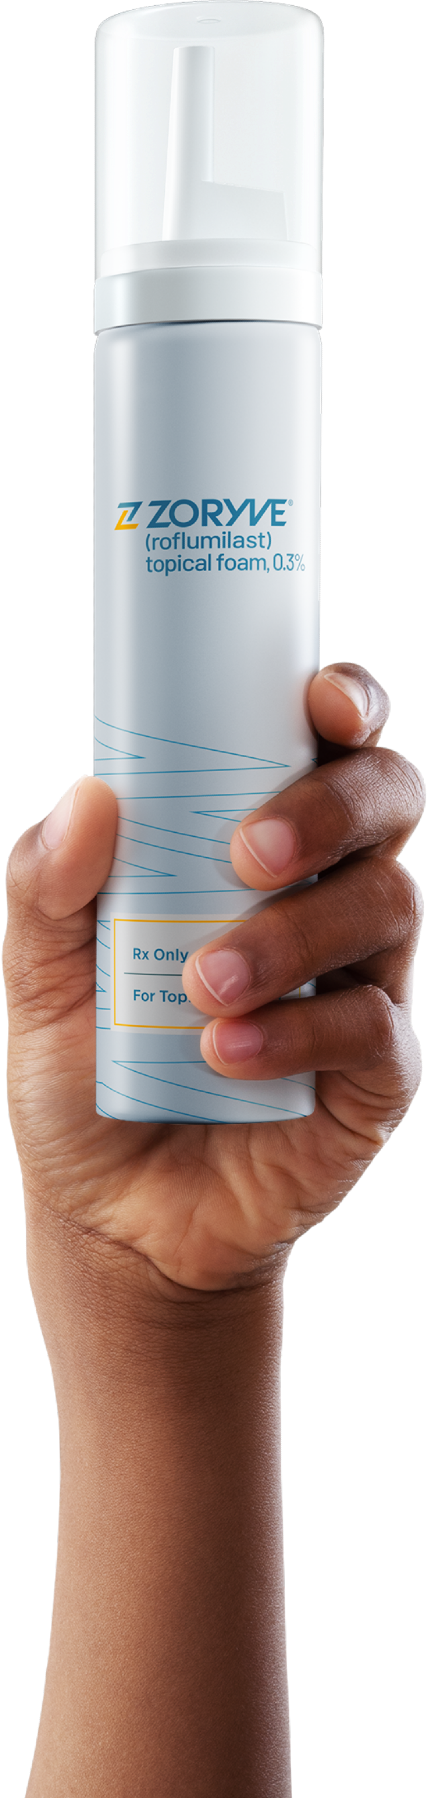 Hand holding up ZORYVE topical foam canister